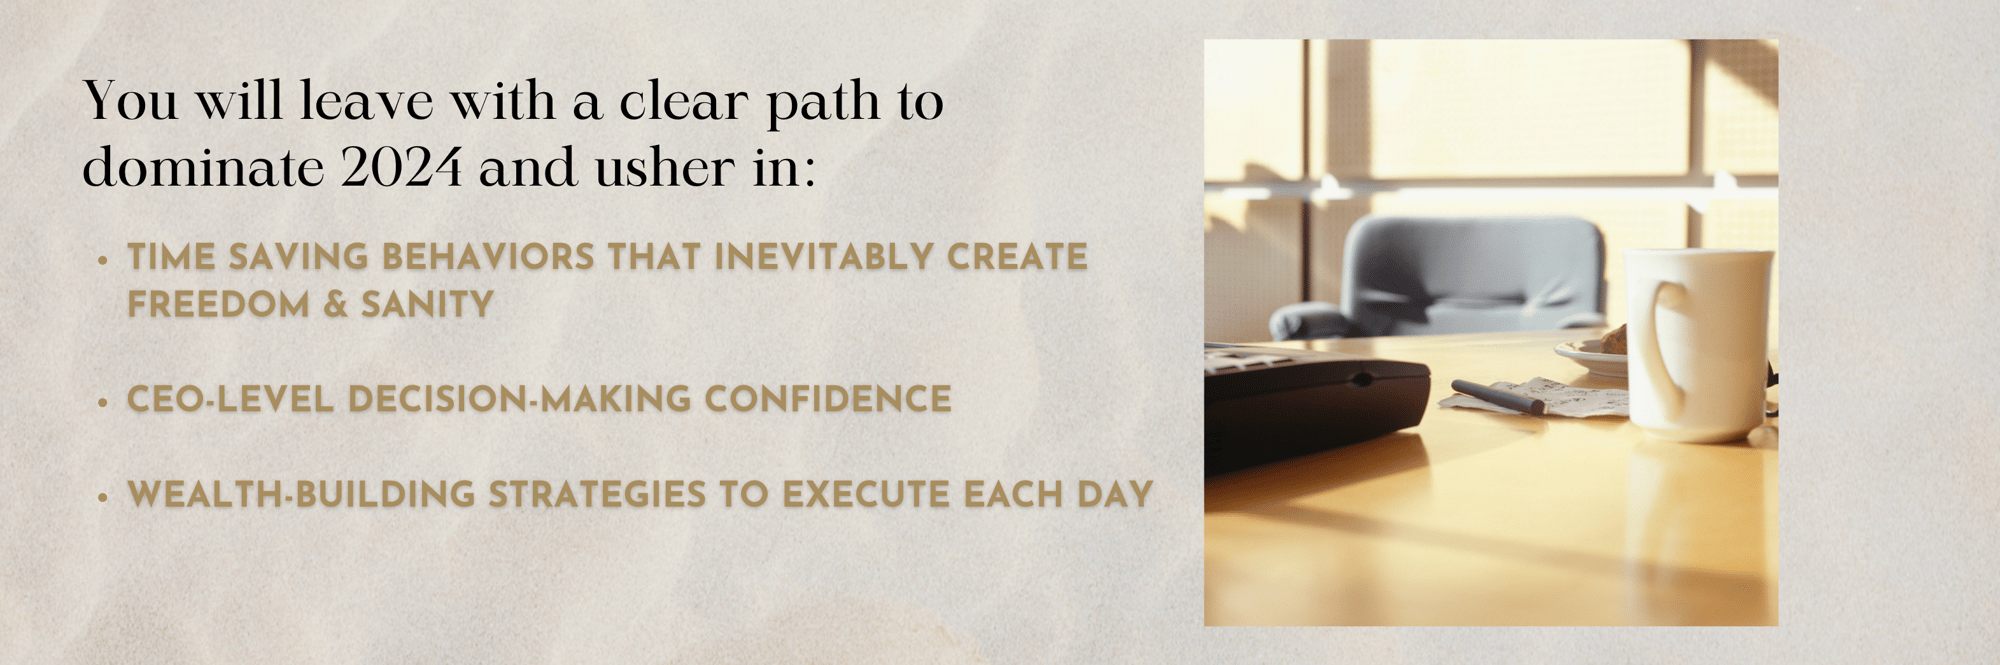 You will leave with a clear path to dominate 2024 and usher in:  - time saving behaviors that inevitably create freedom and sanity - CEO-level decision-making confidence  - wealth-building strategies to execute each day